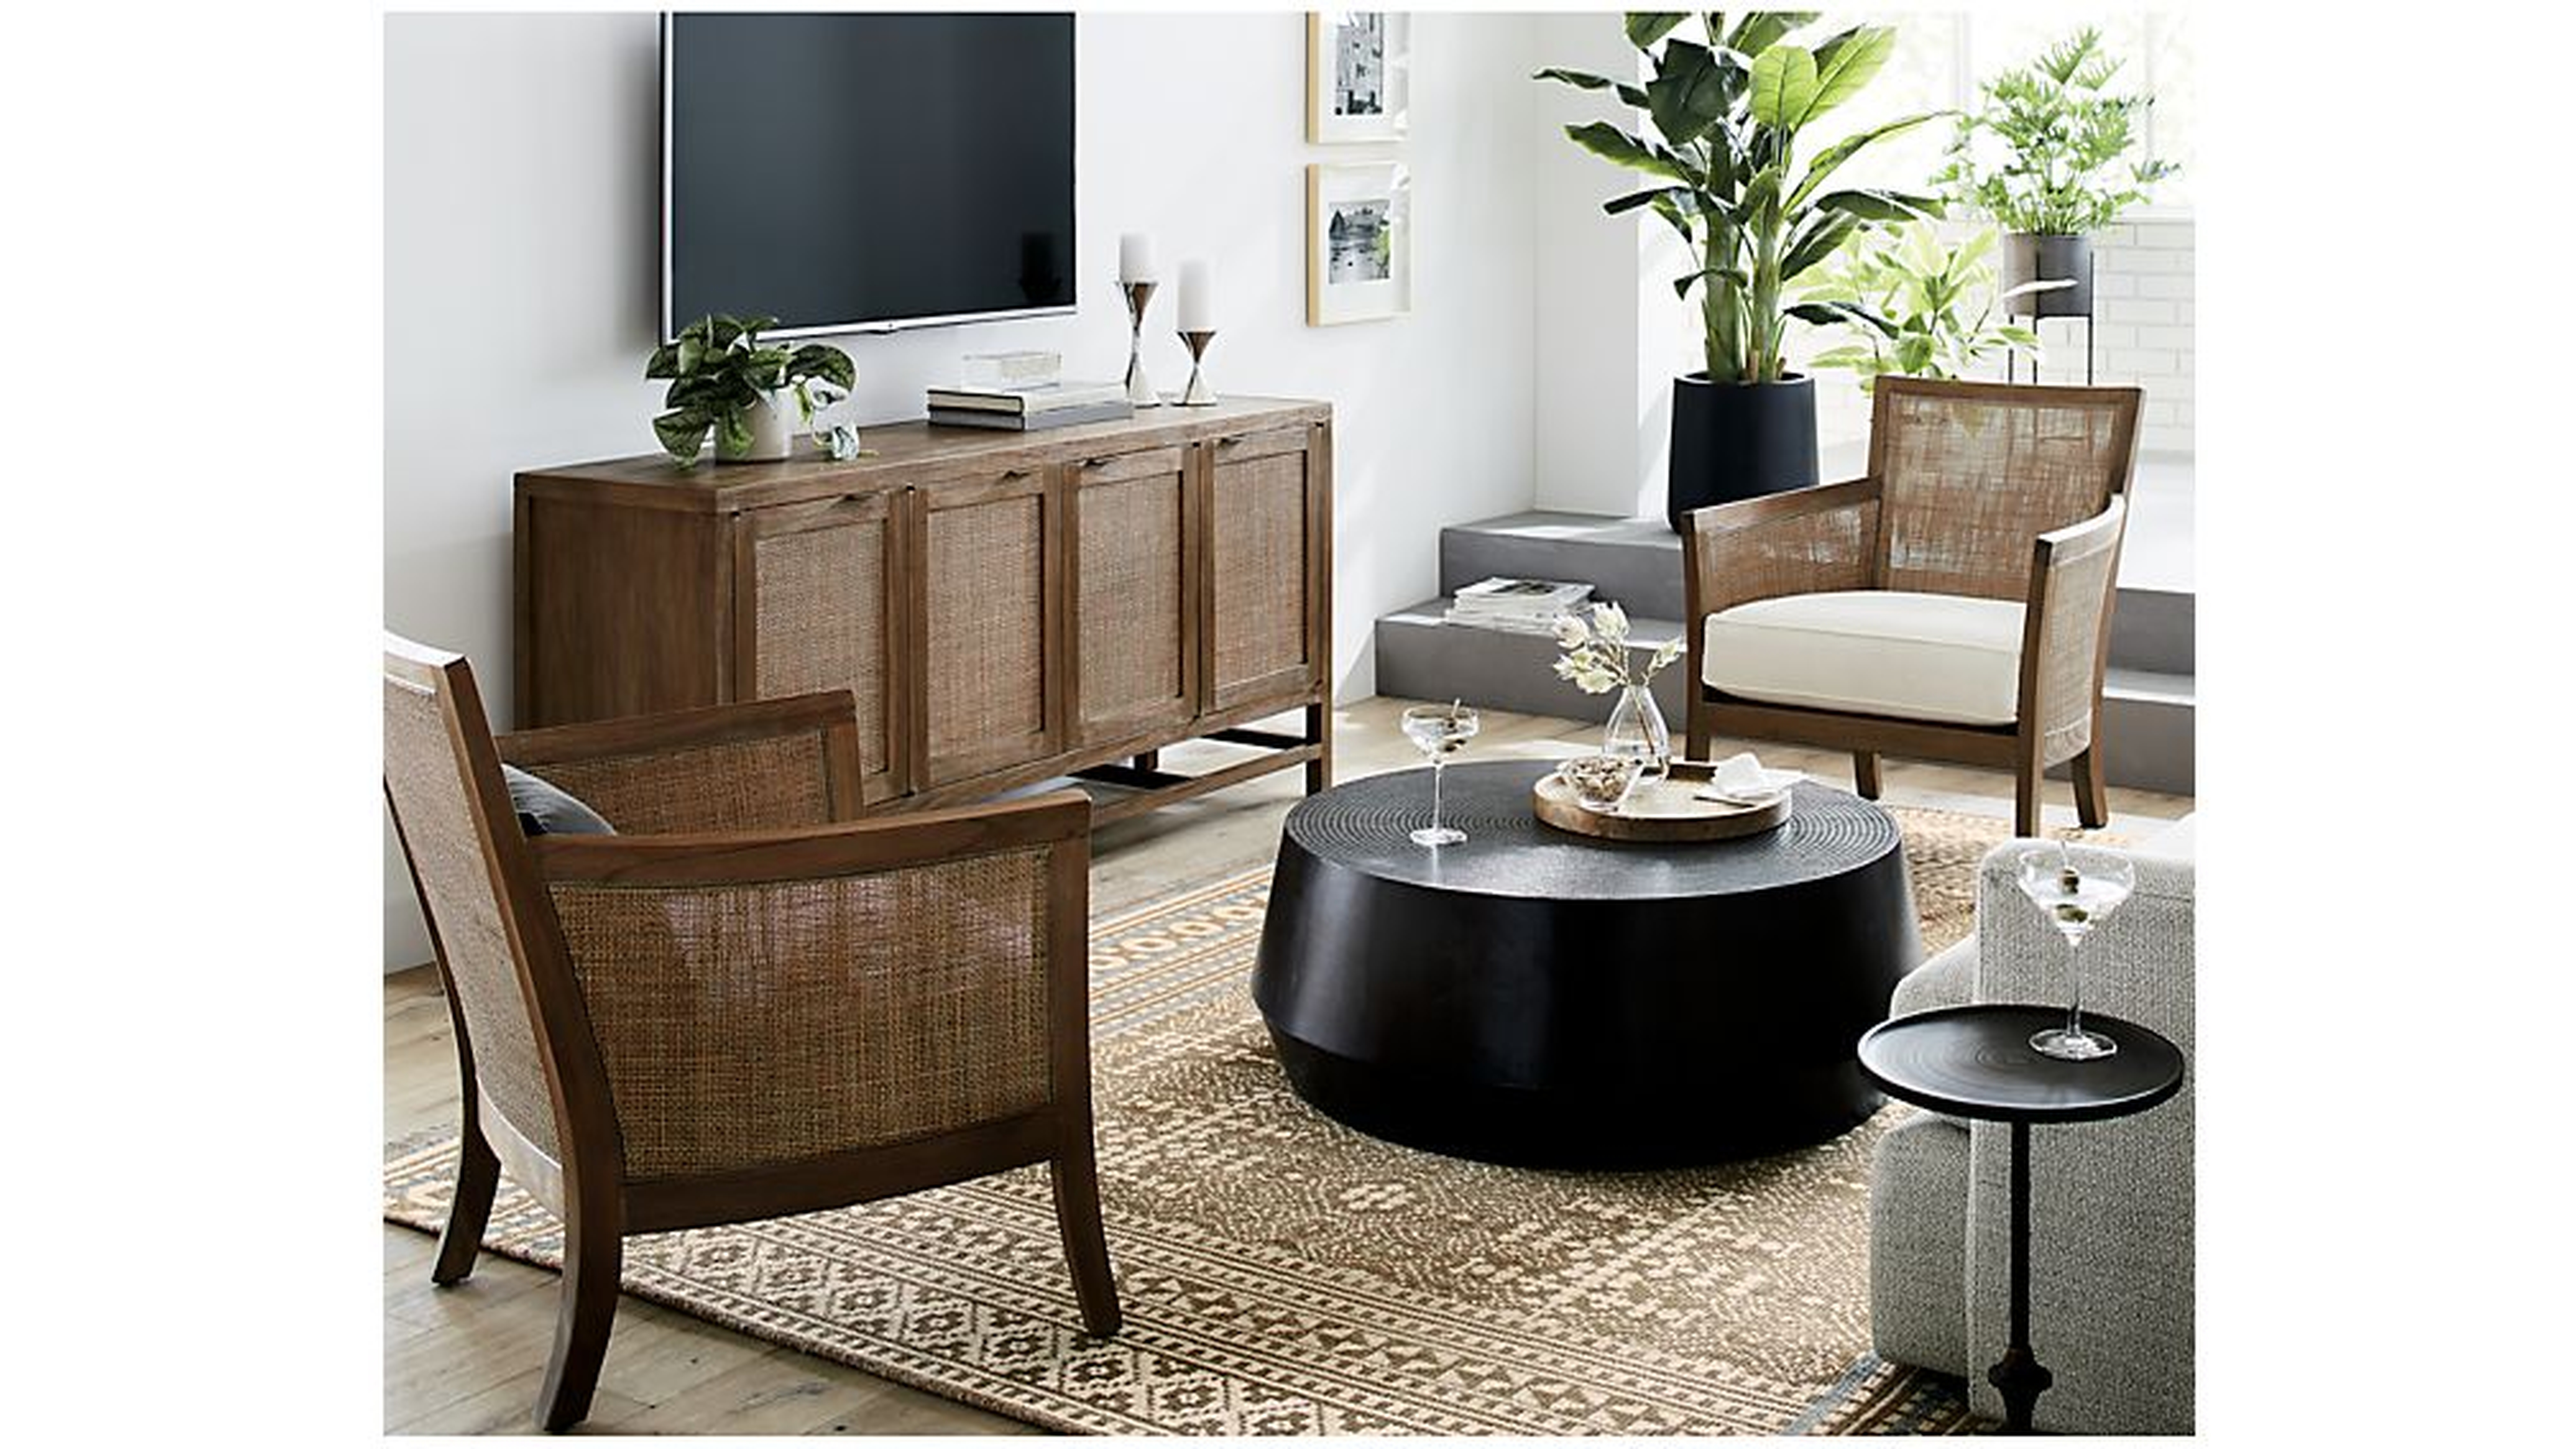 Udan Round Coffee Table - Crate and Barrel